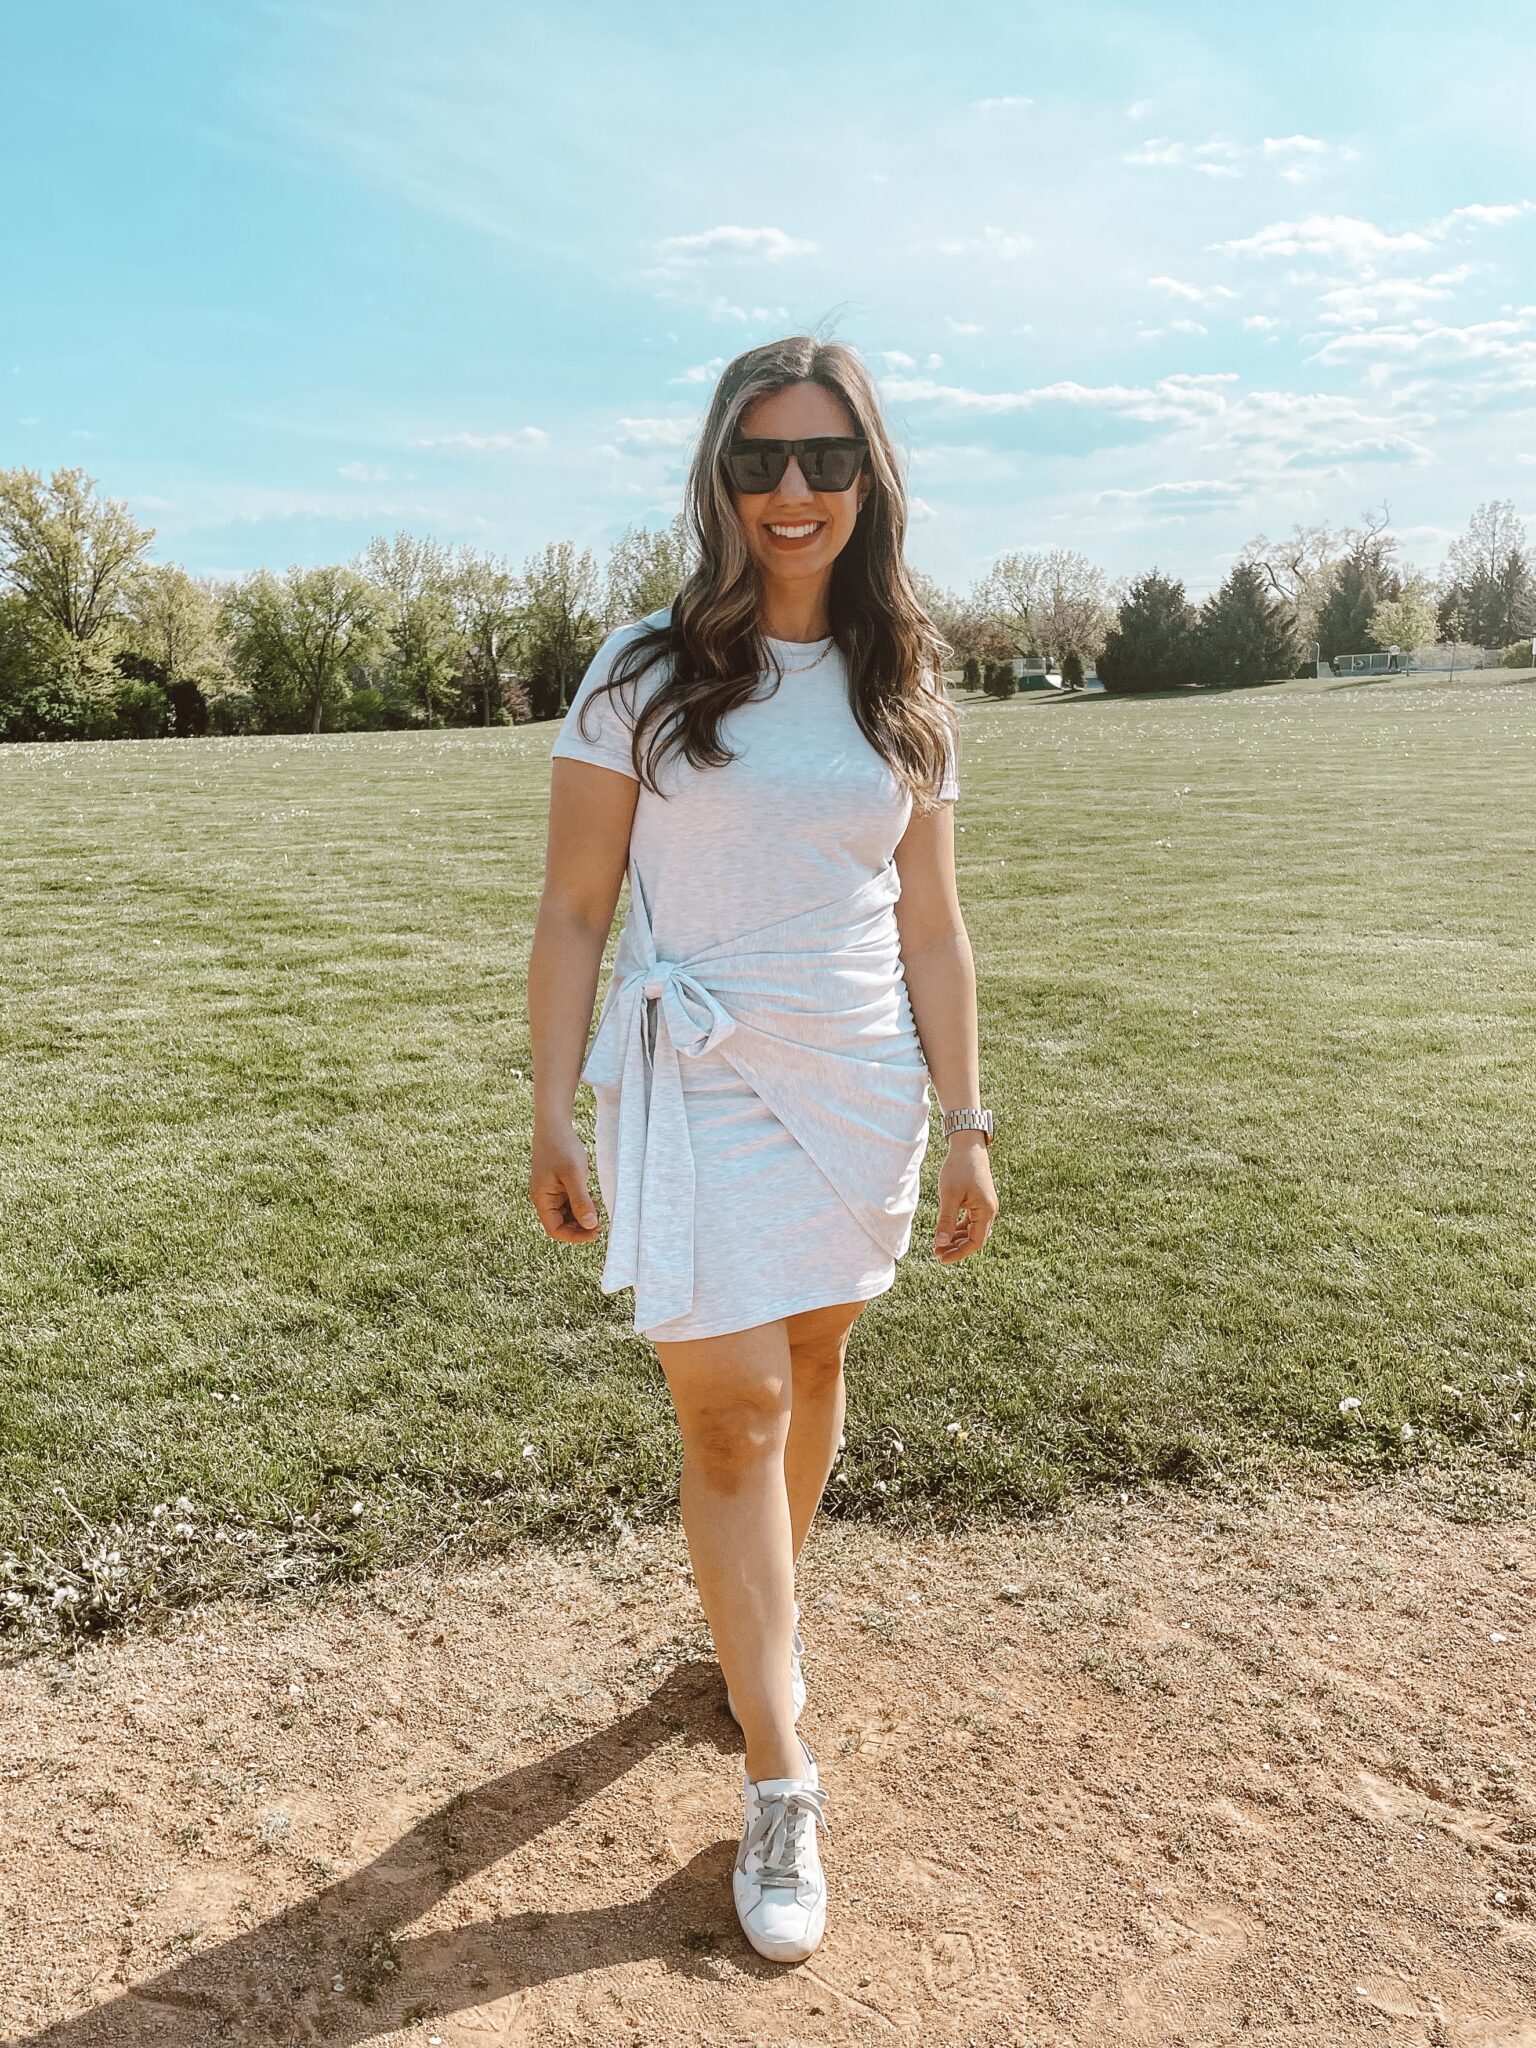 Amazon Dress by popular Chicago fashion blog, Glass of Glam: image of a woman standing outside in a field and wearing a grey Amazon dress, white sneakers, and gold Gorjana necklace. 